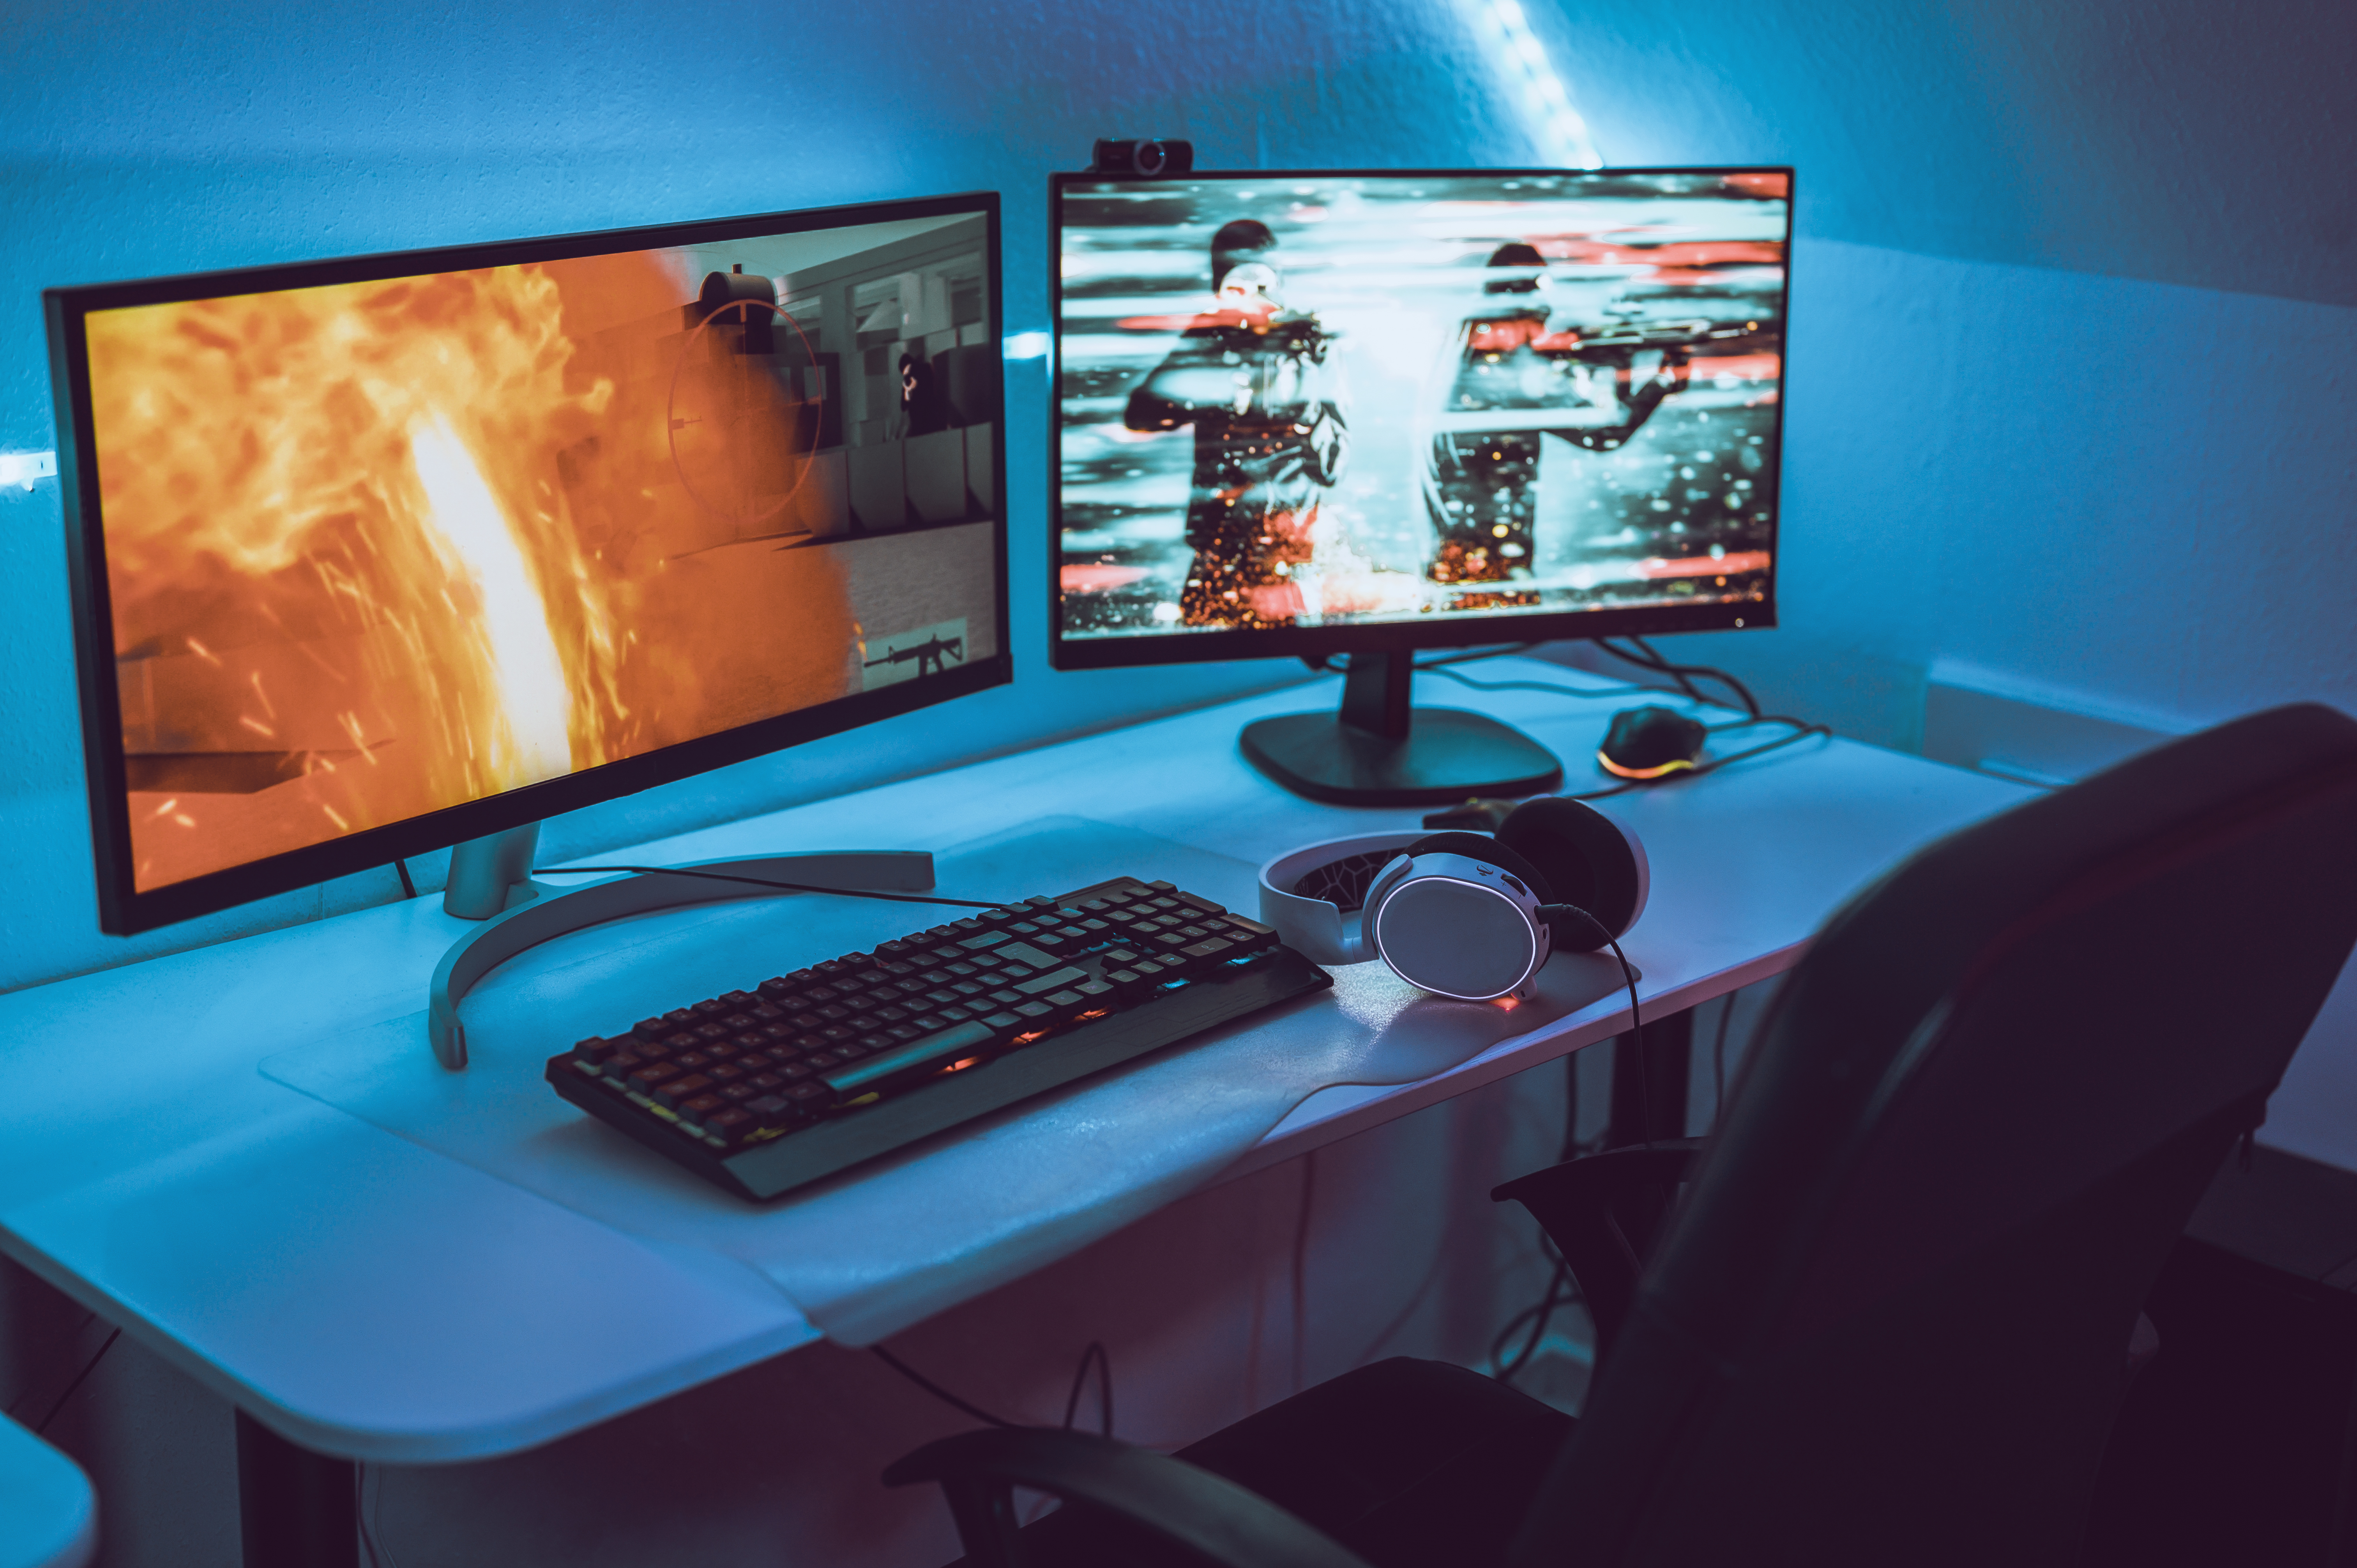 Image of a gaming computer setup with two monitors.